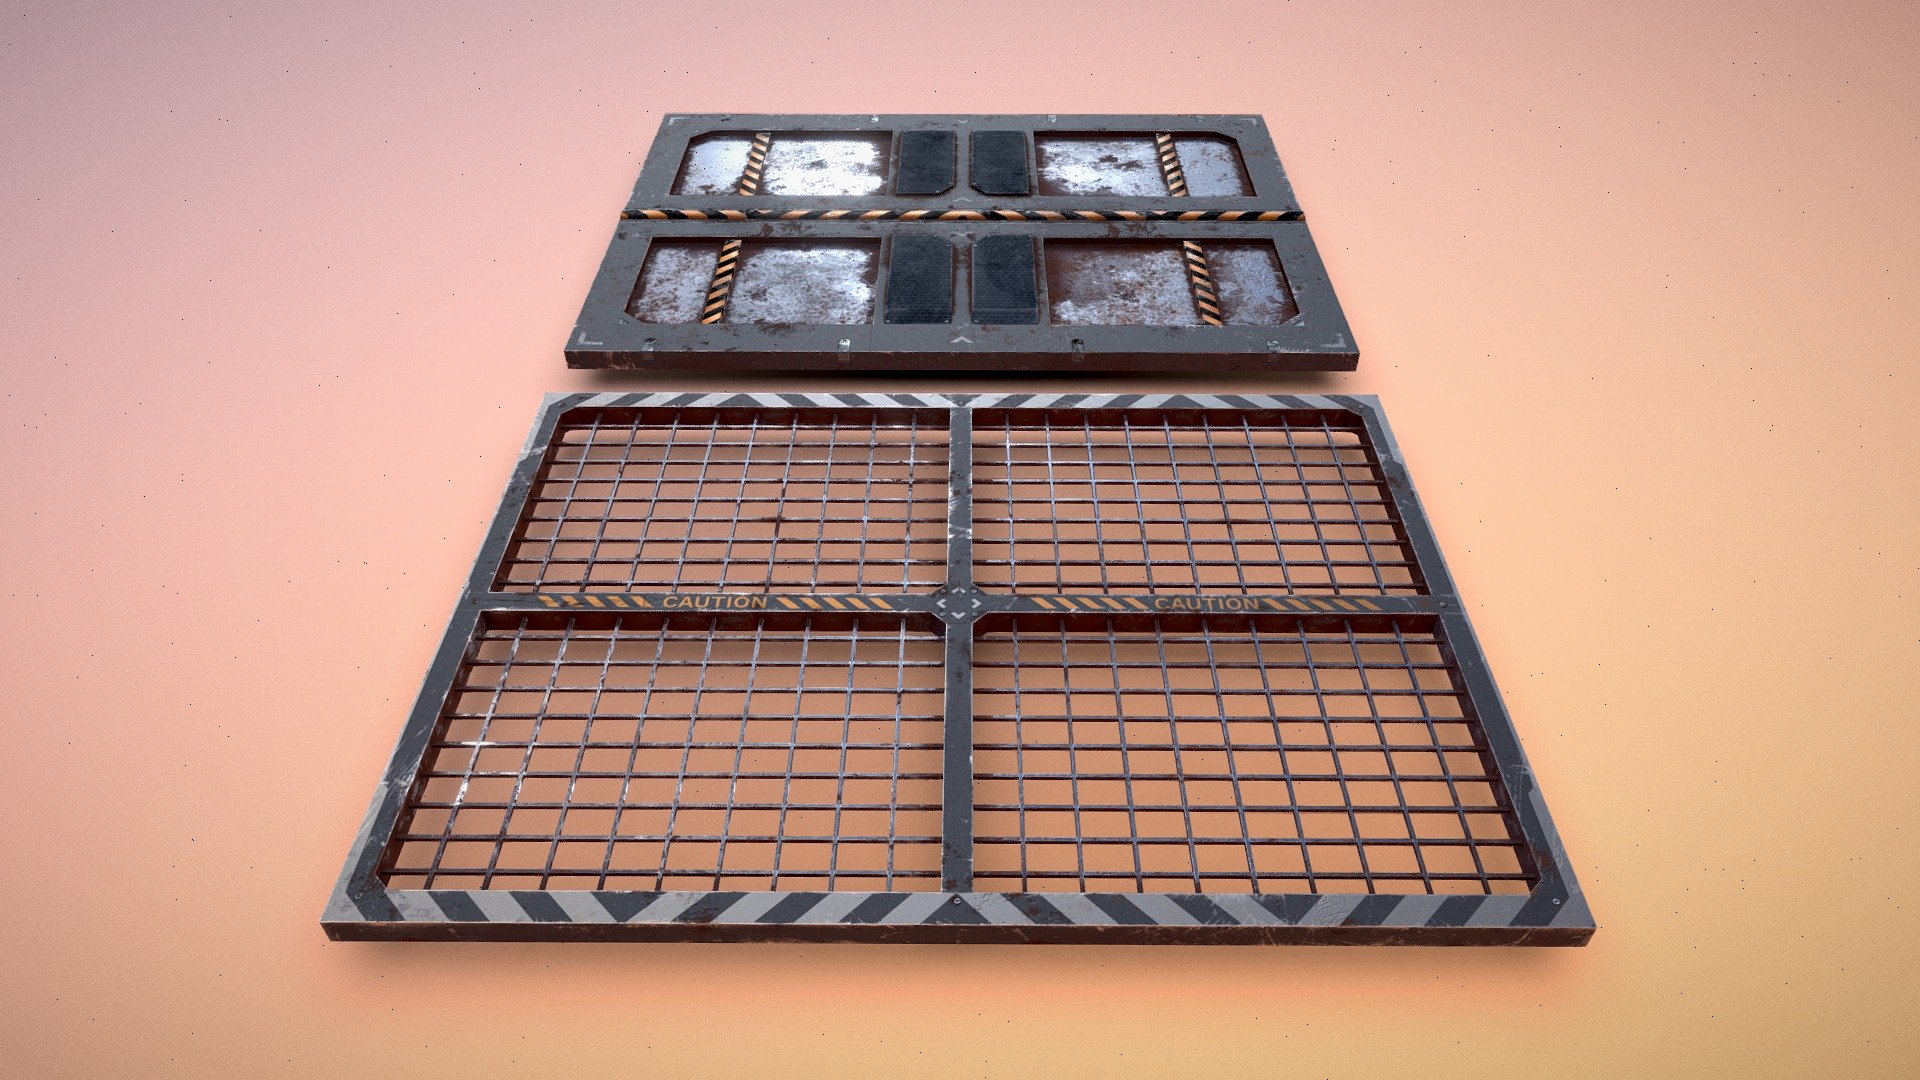 These are a couple of floor panels I created for an industrial sci-fi environment I'm working on. The designs are my own. I wanted to do something other than the typical 1:1 square panel. I plan on making a few more designs in the same style before my environment is complete. No sculpt needed for these, all texture work was done in substance painter 3d model